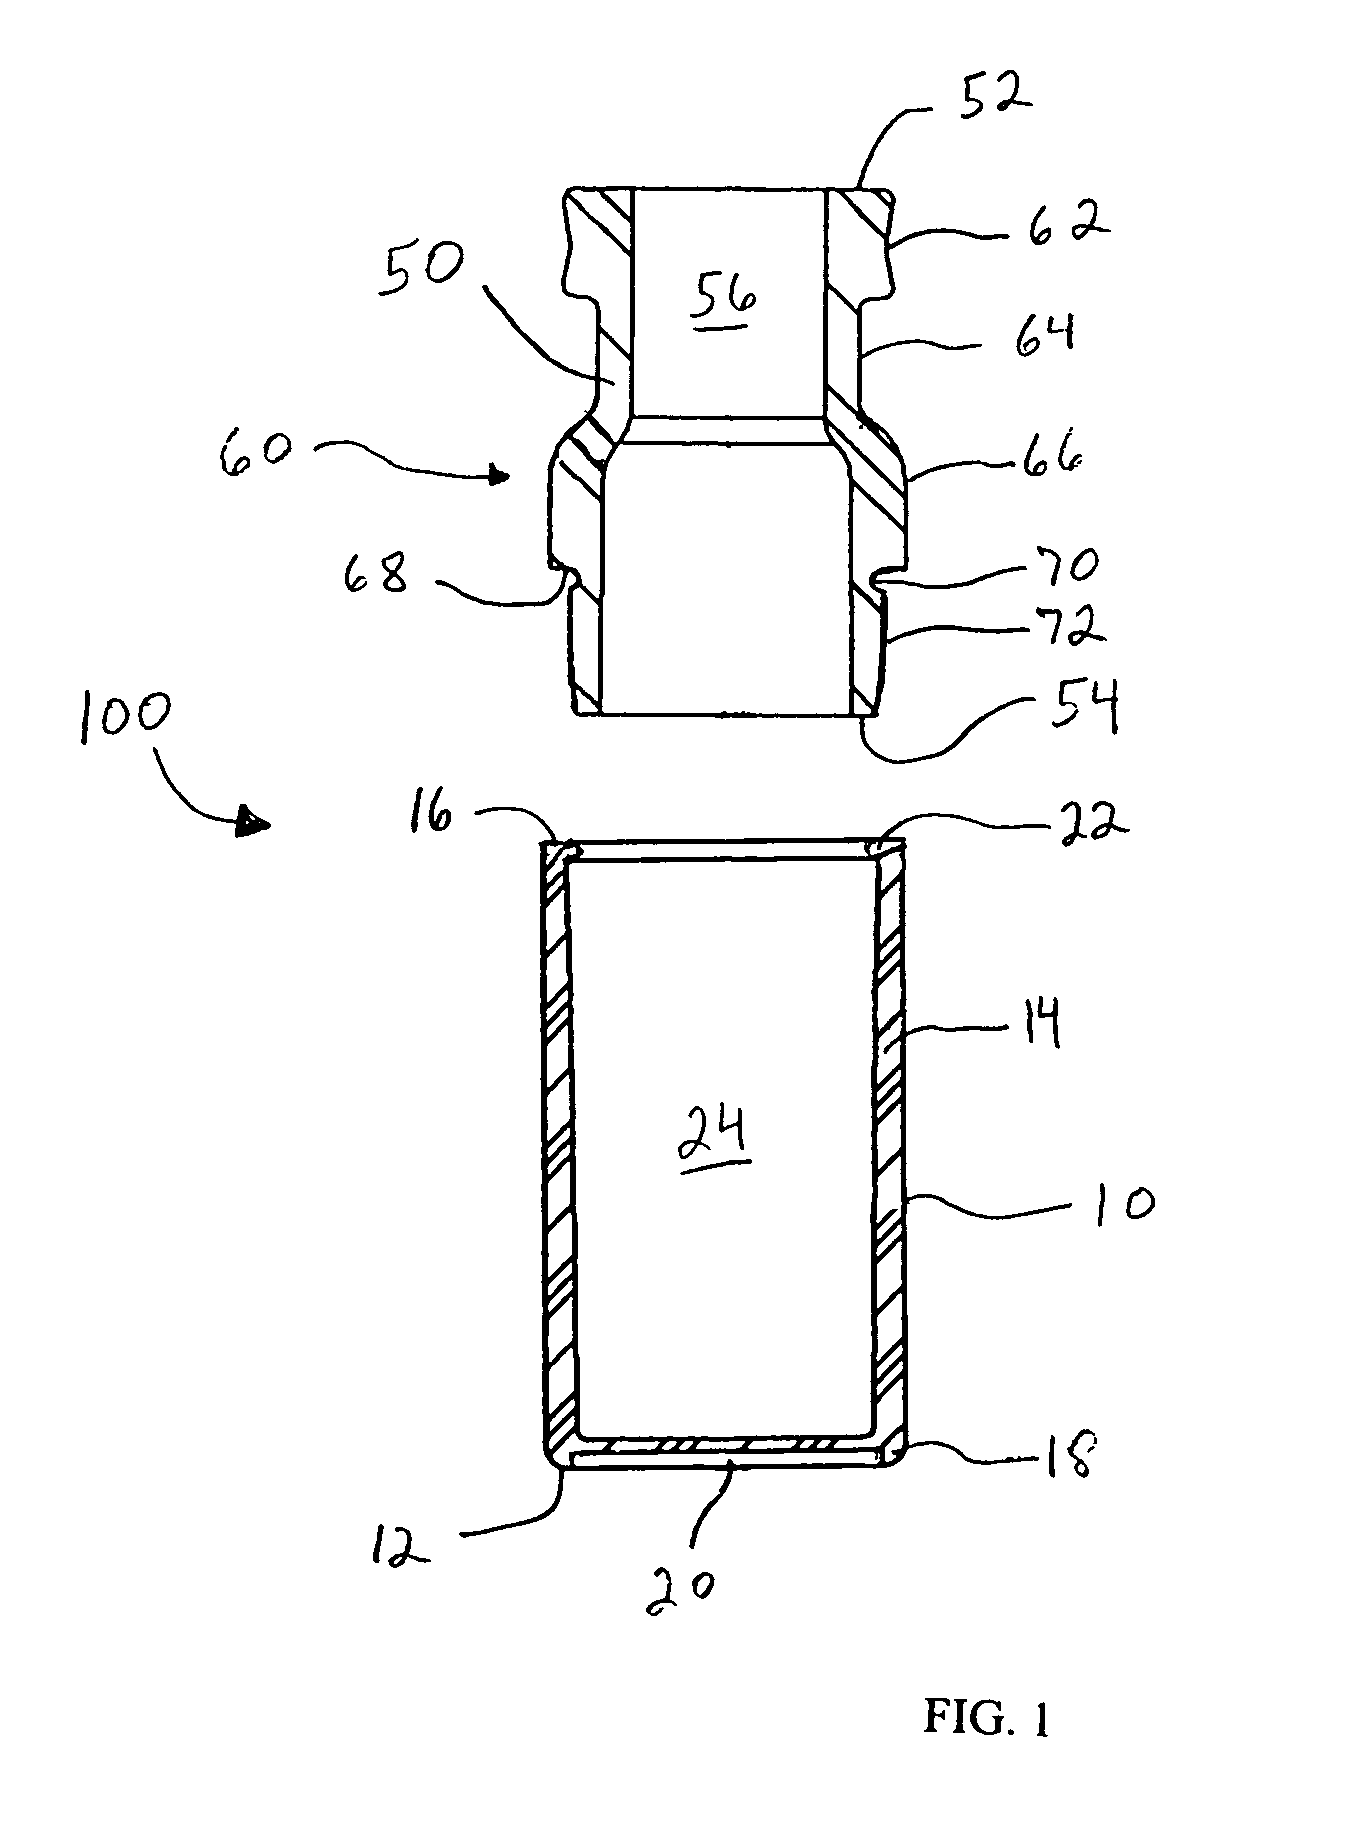 Two-piece seal vial assembly